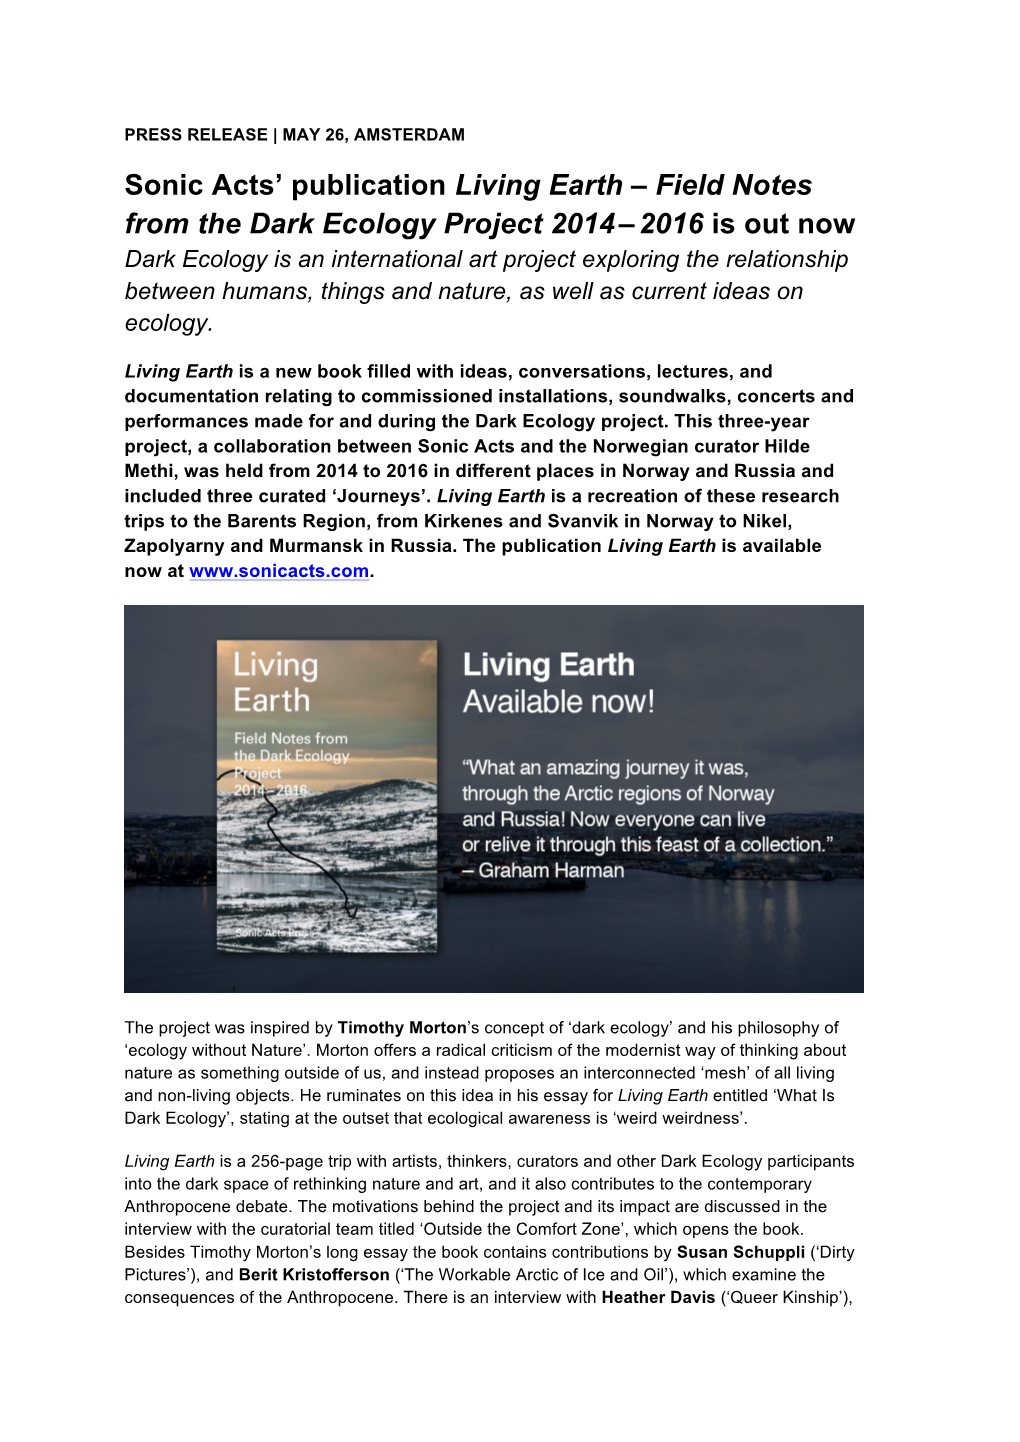 Sonic Acts' Publication Living Earth – Field Notes from the Dark Ecology Project 2014–2016 Is Out